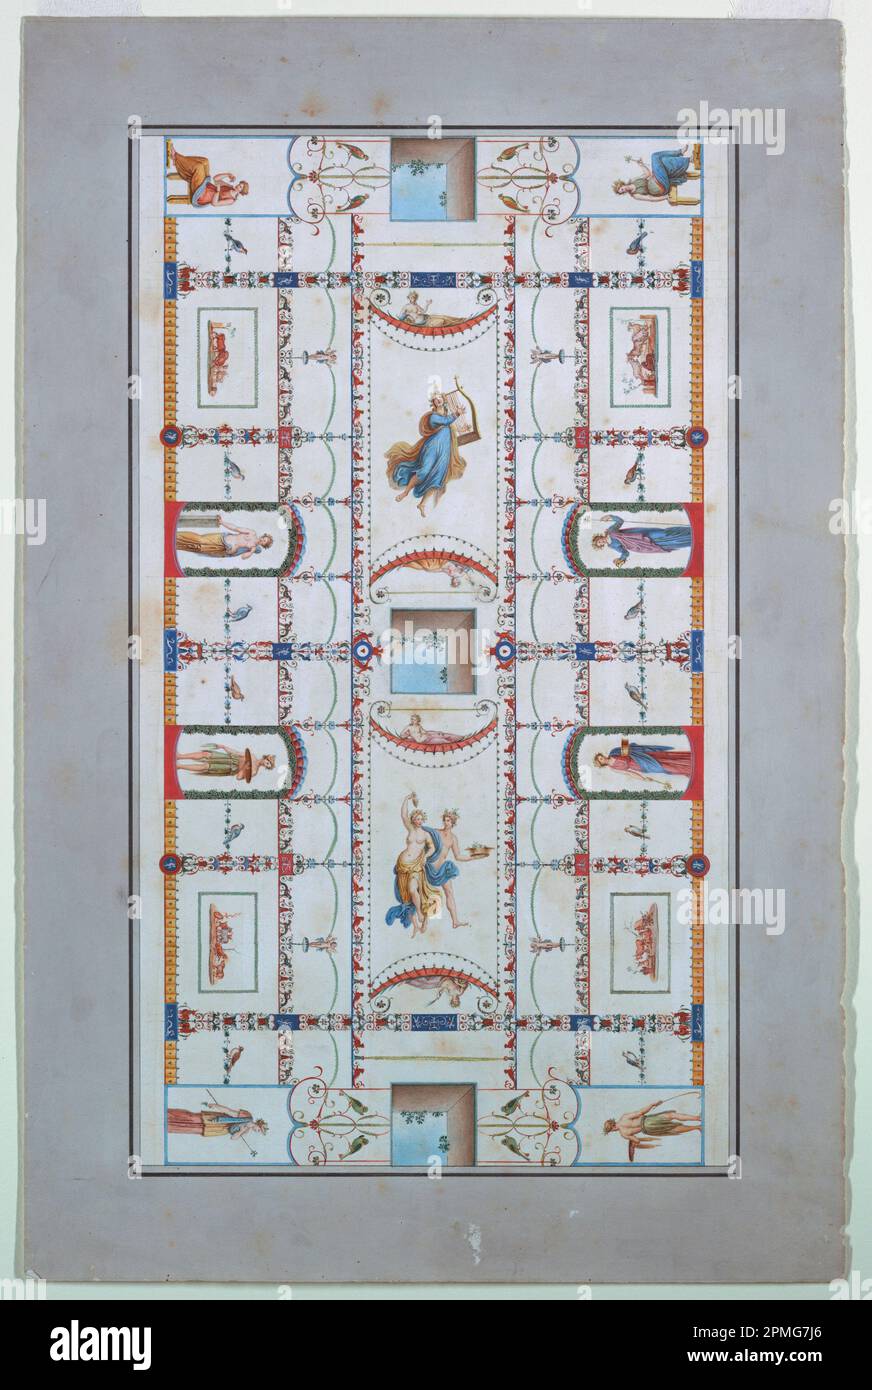 Object ID #18544553; Italy; pen and black ink, watercolor, ruled borders in pen and black support: white laid paper; 45.4 x 29.6 cm (17 7/8 x 11 5/8 in.) image: 37.0 x 21.2 Mat: 55.9 x 71.1 cm (22 x 28 in.) Stock Photo